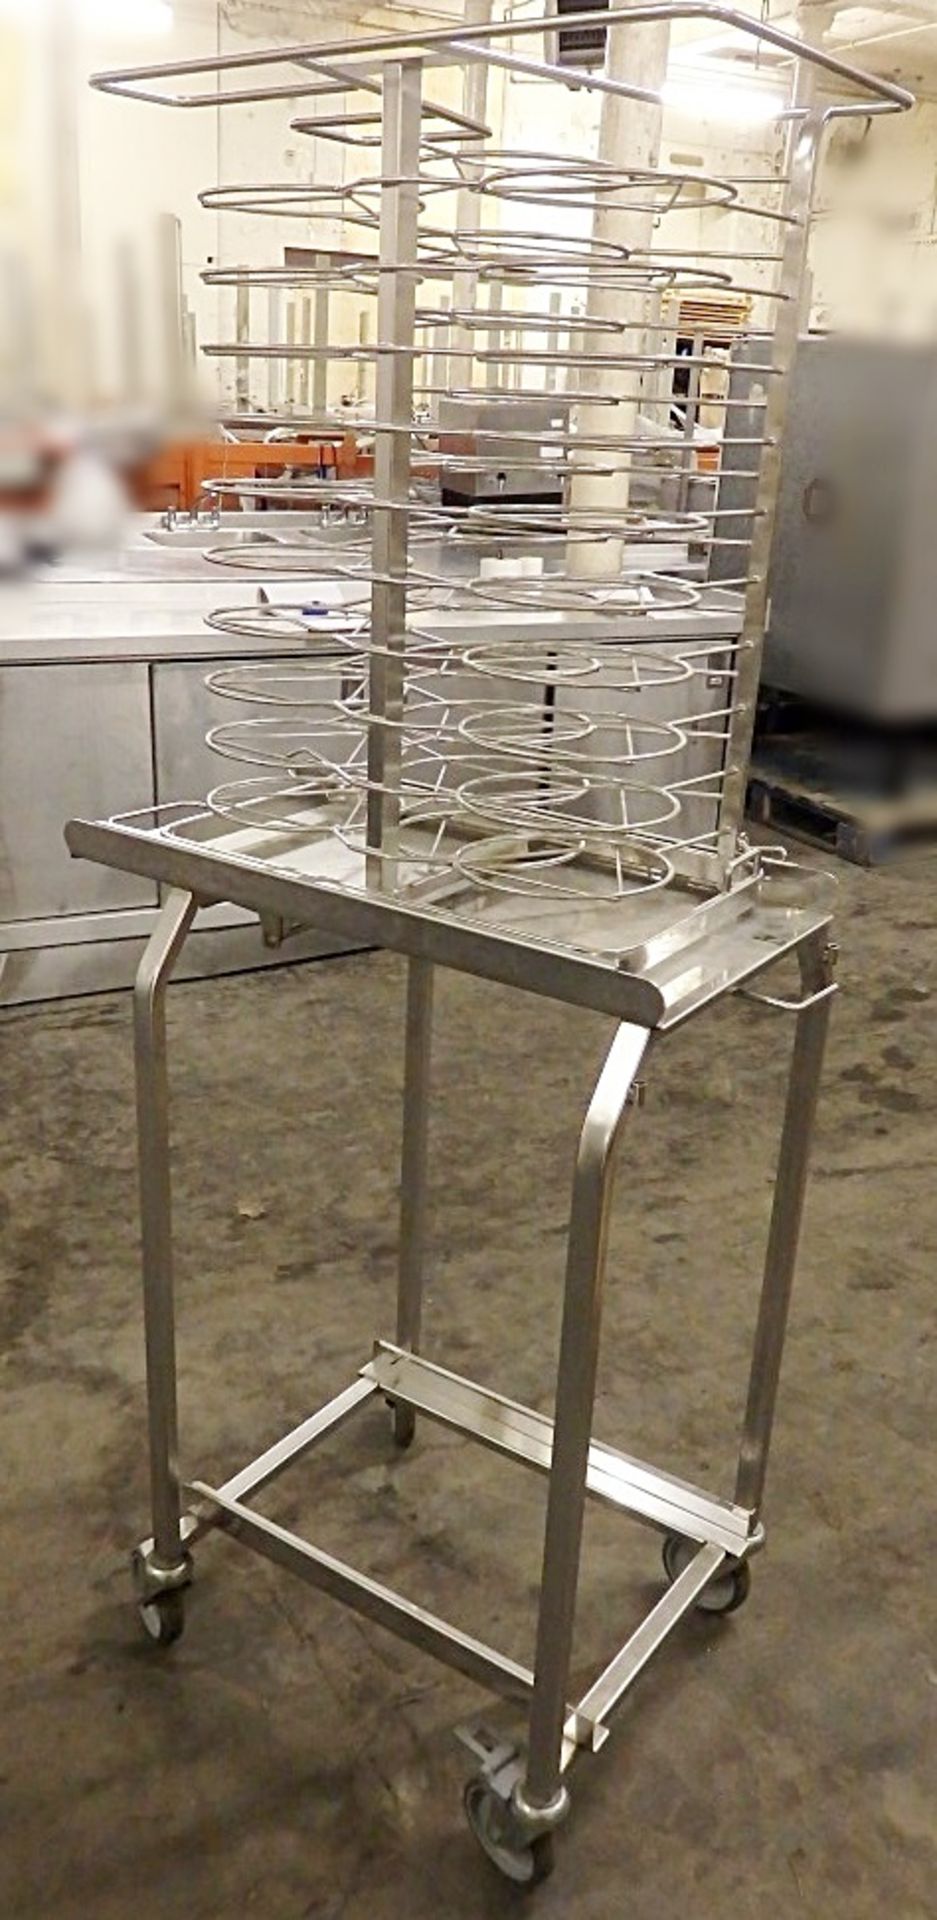 1 x Stainless Steel Plate Rack / Trolley With Thermal Cover -  Only Used Once Before - 31 Plate